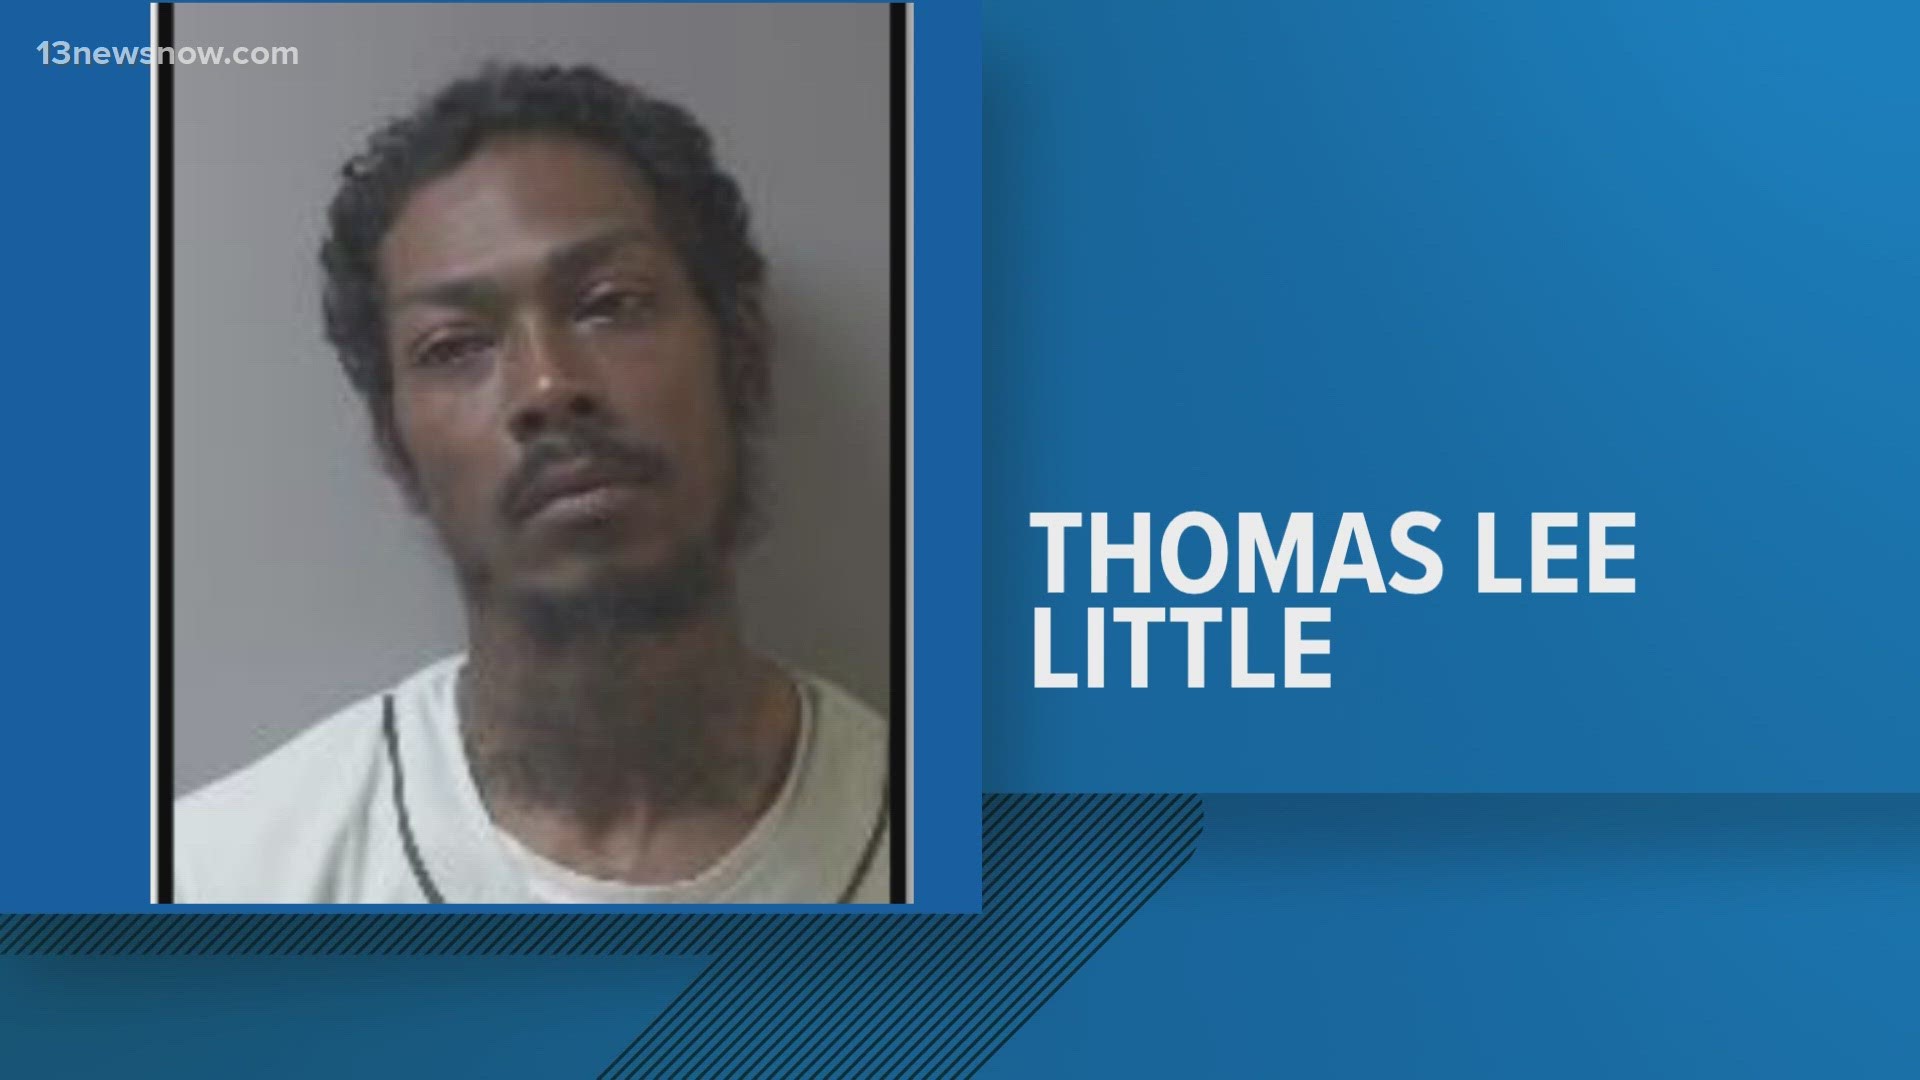 33-year-old Thomas Lee Little Sr. is wanted for Thursday's deadly shooting on Duke Street.